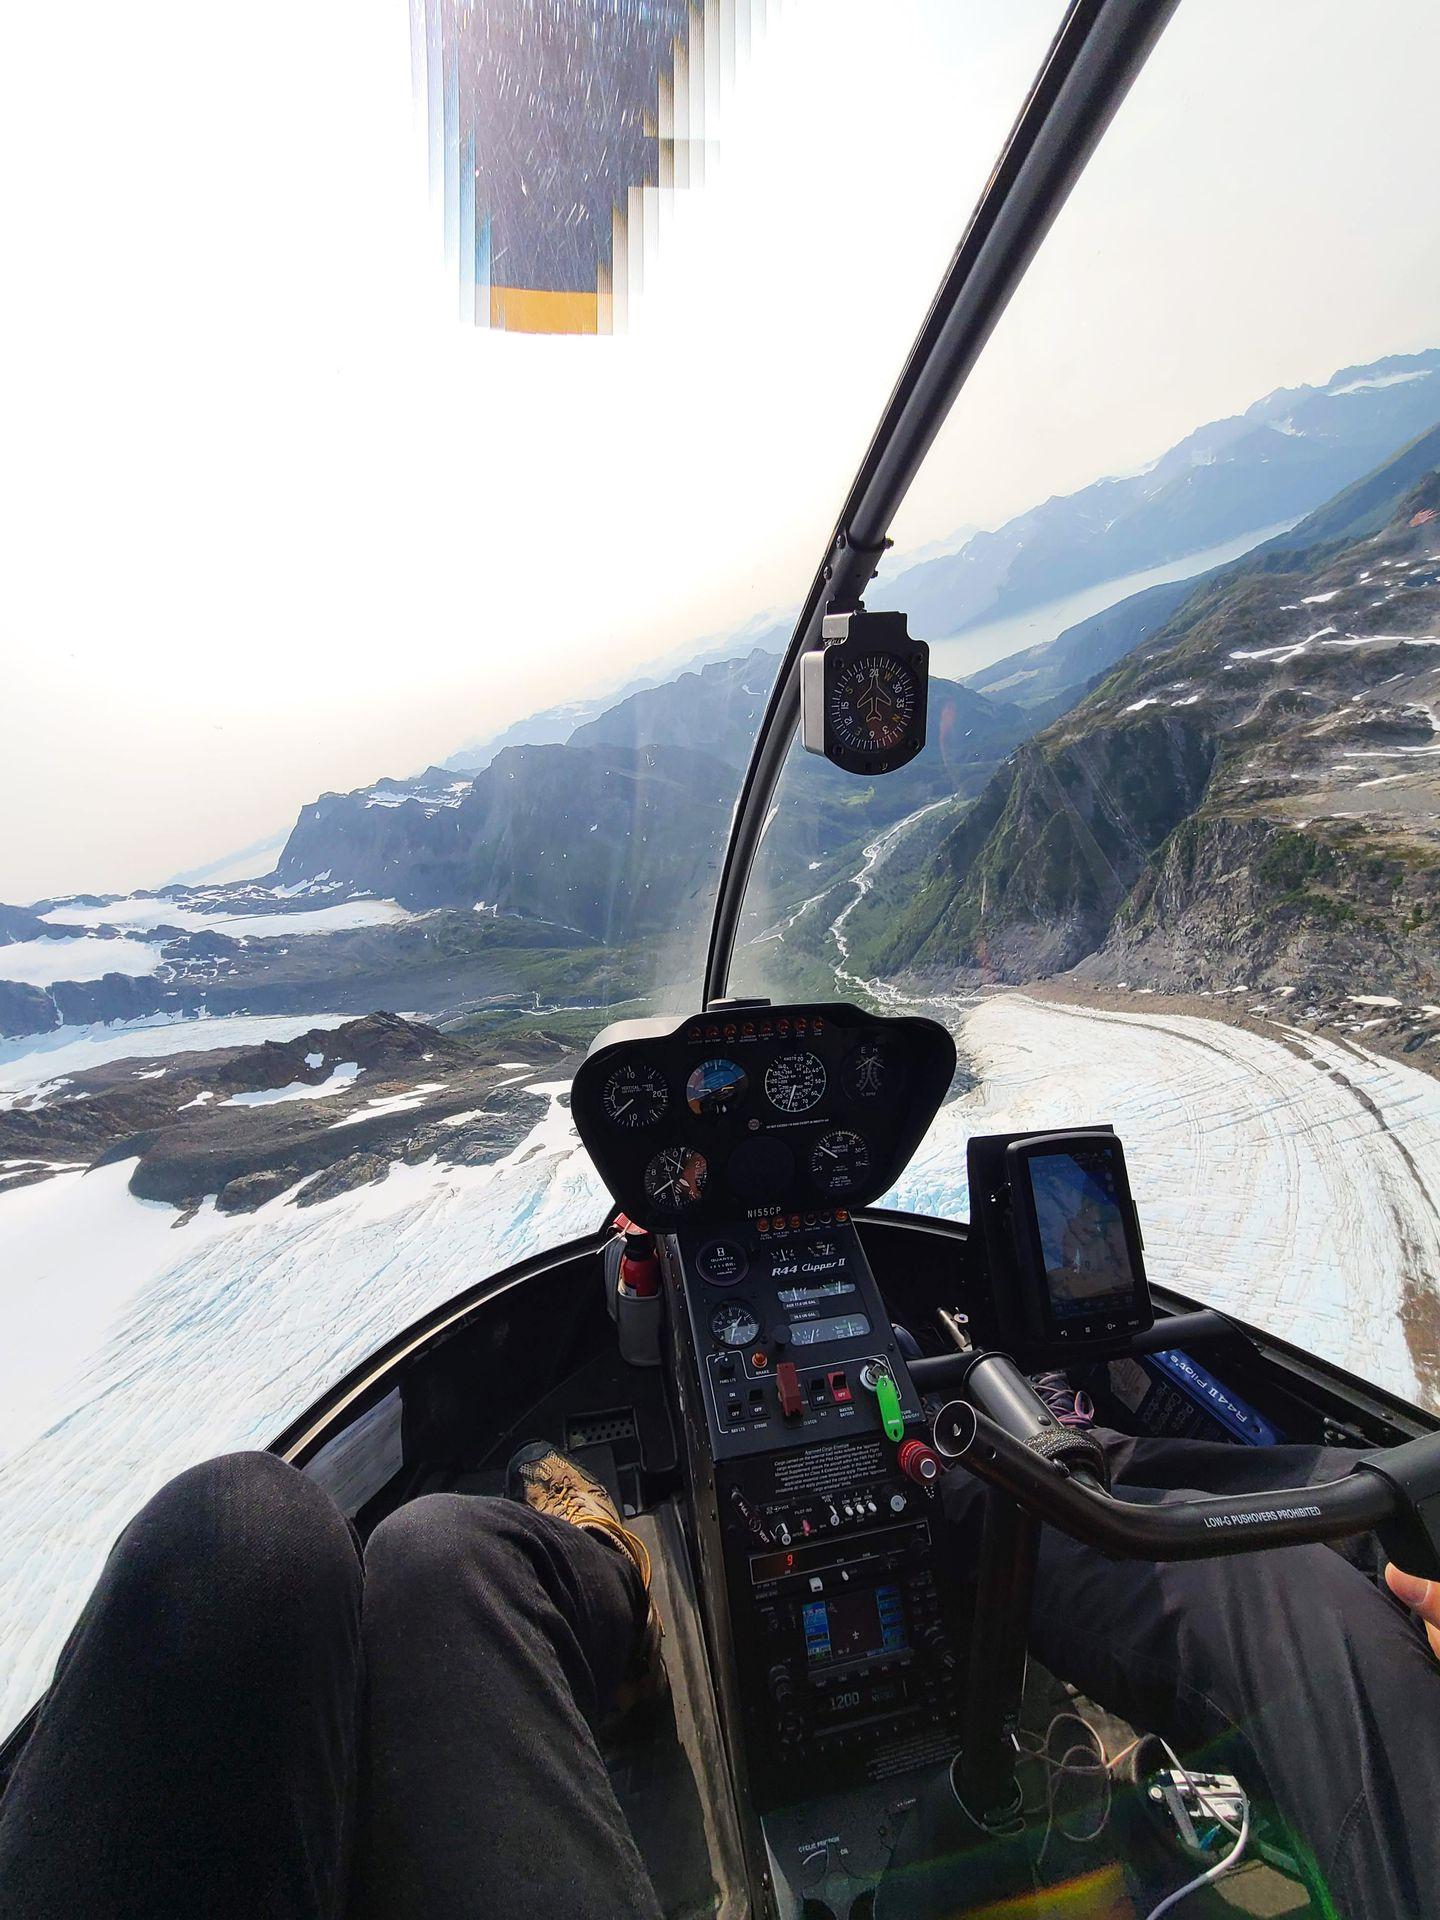 A view from inside a helicopter flying over snow and mountains near Seward.